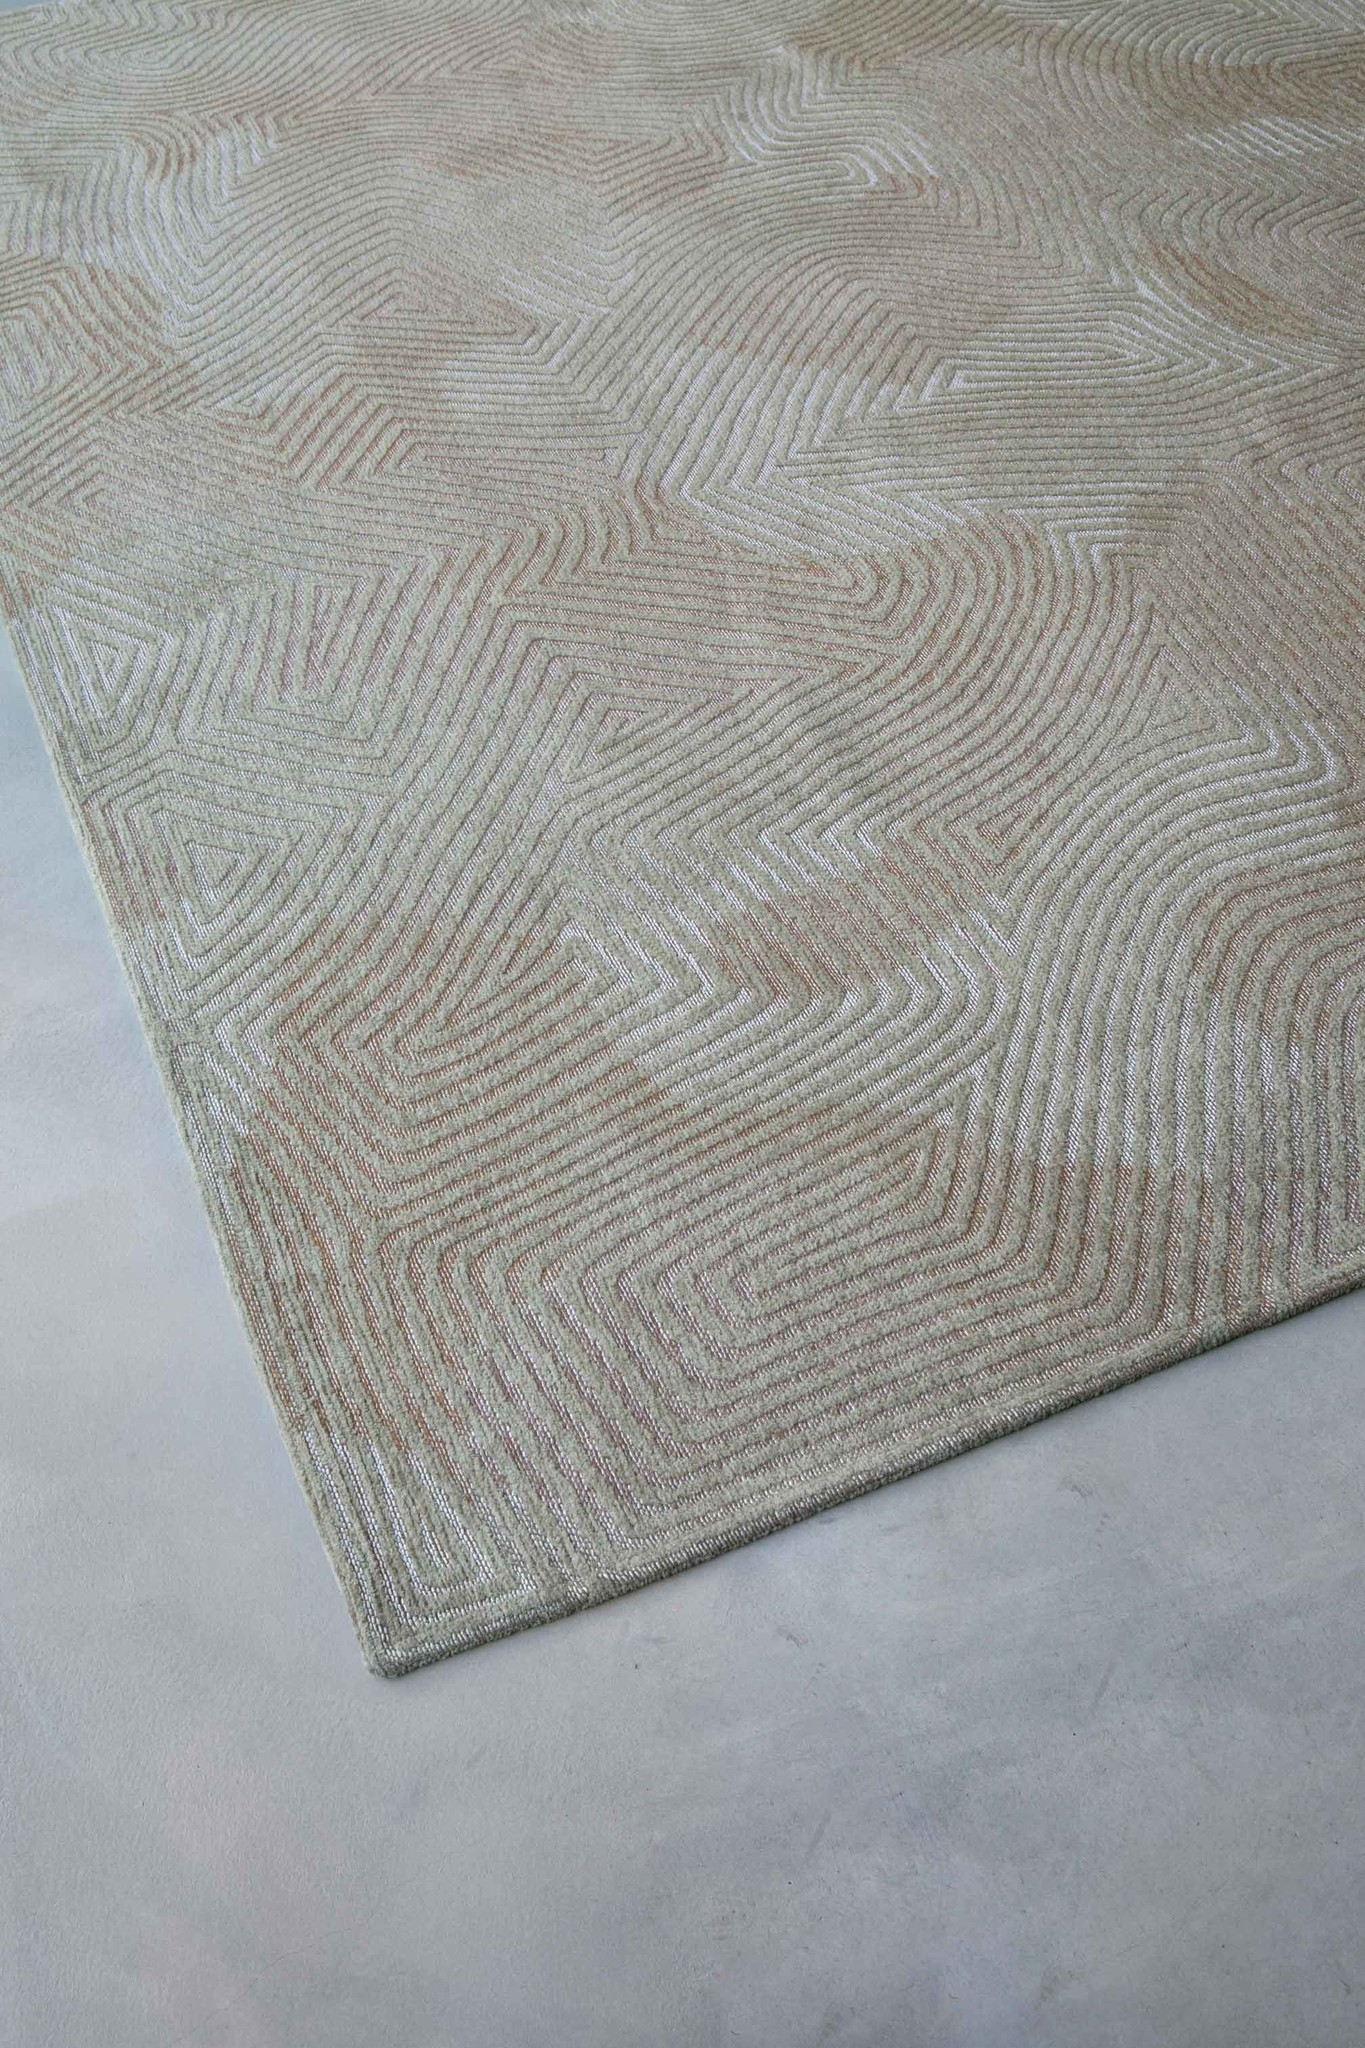 Coral - Shell Beige 9229 ☞ Size: 80 x 150 cm